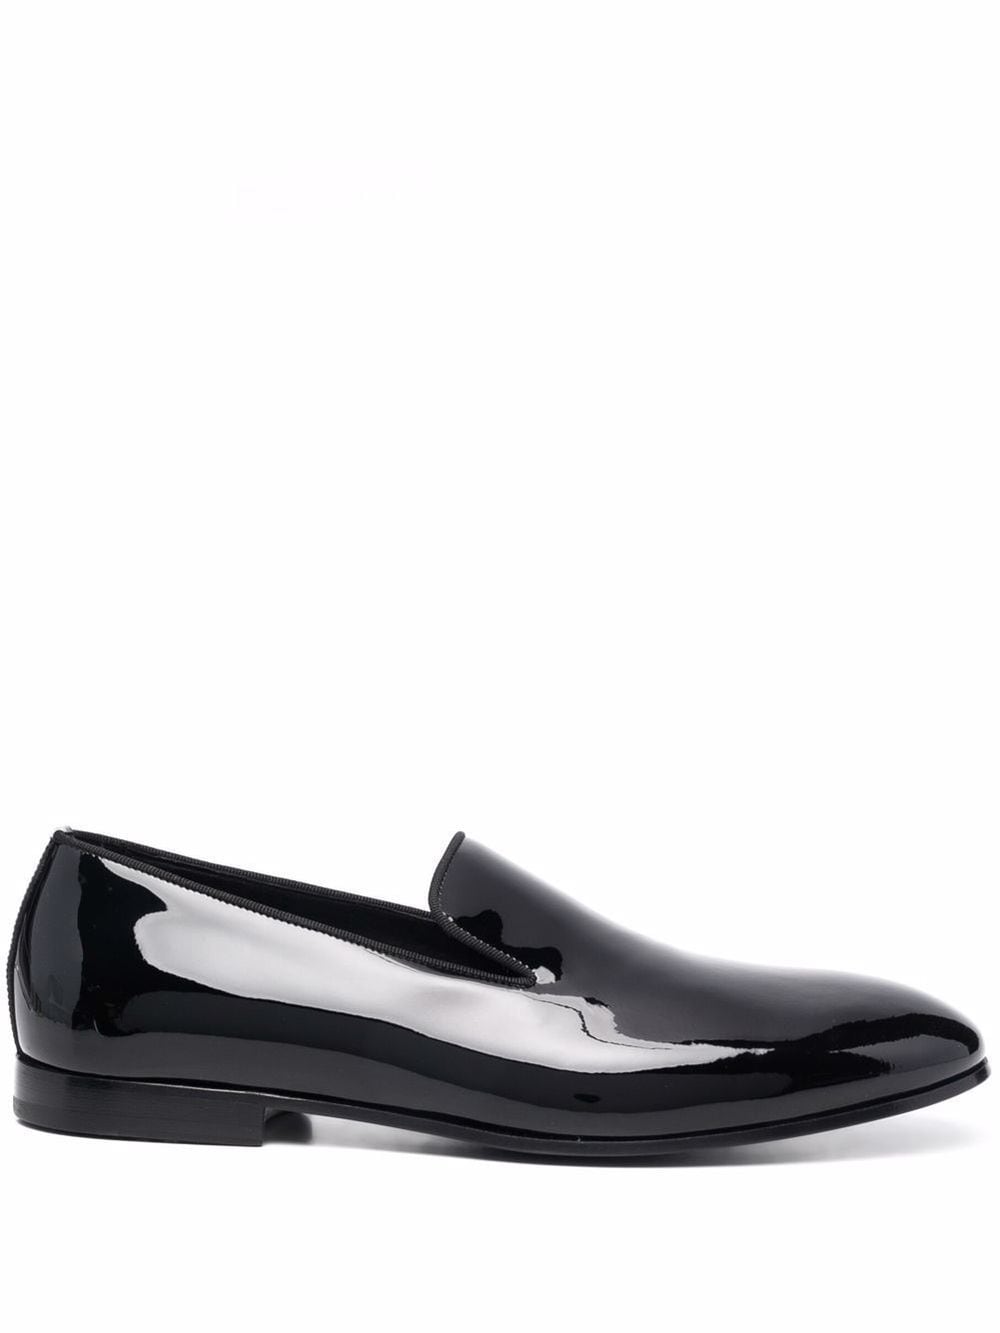 DOUCAL'S PATENT LEATHER LOAFERS